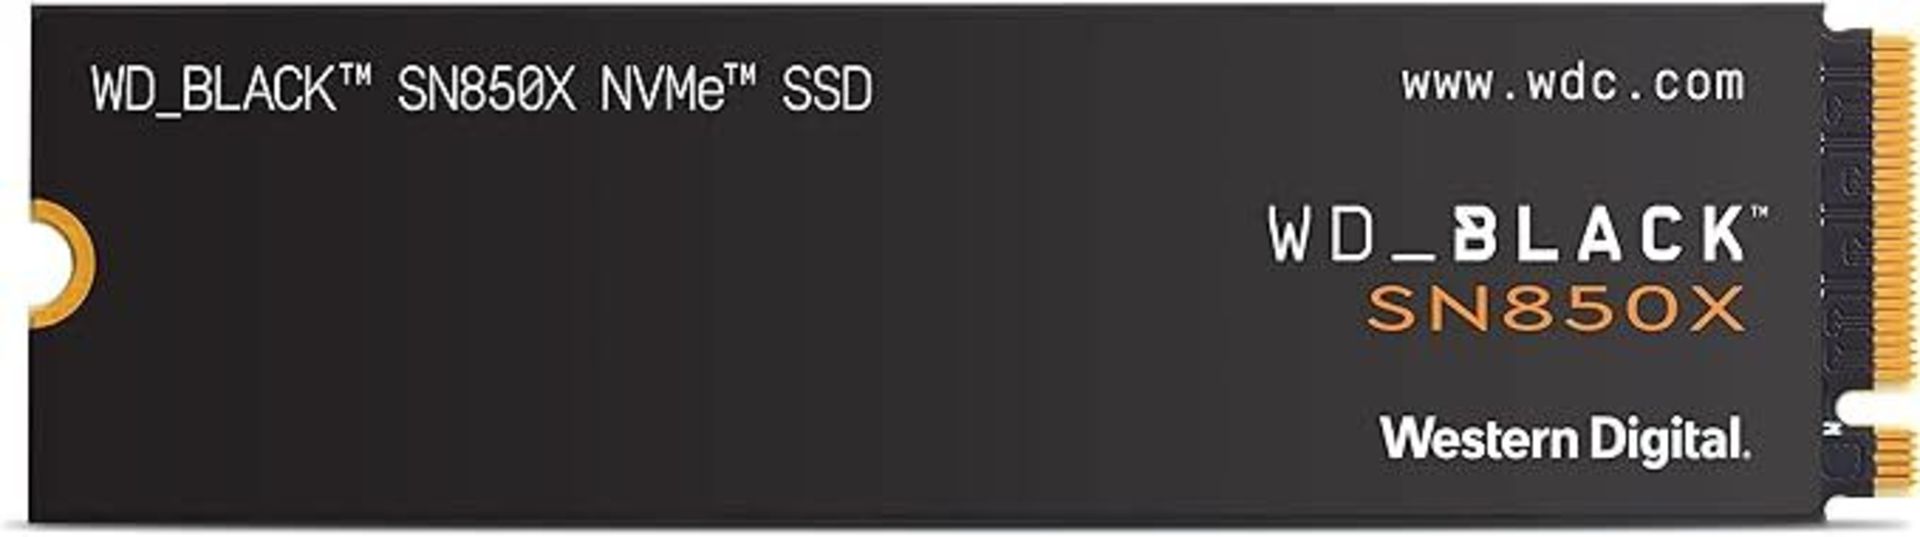 WD_BLACK SN850X 2TBM.2 2280 Game Drive PCIe Gen4 NVMe up to 7300 MB/s. - P2. RRP £395.00. Get the